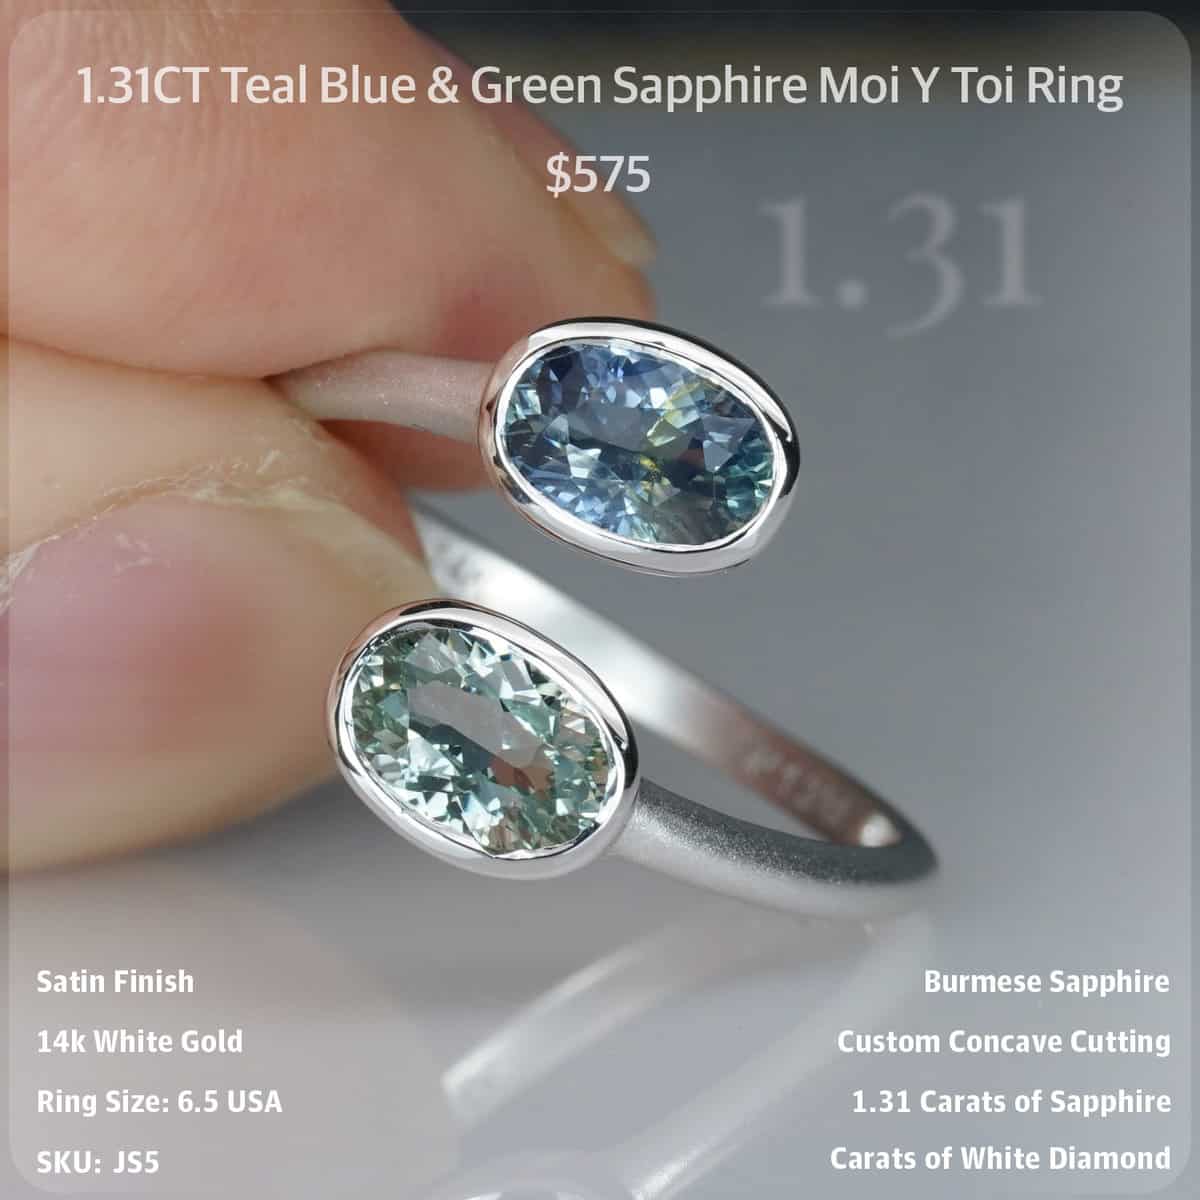 1.31CT Teal Blue & Green Sapphire Moi Y Toi Ring